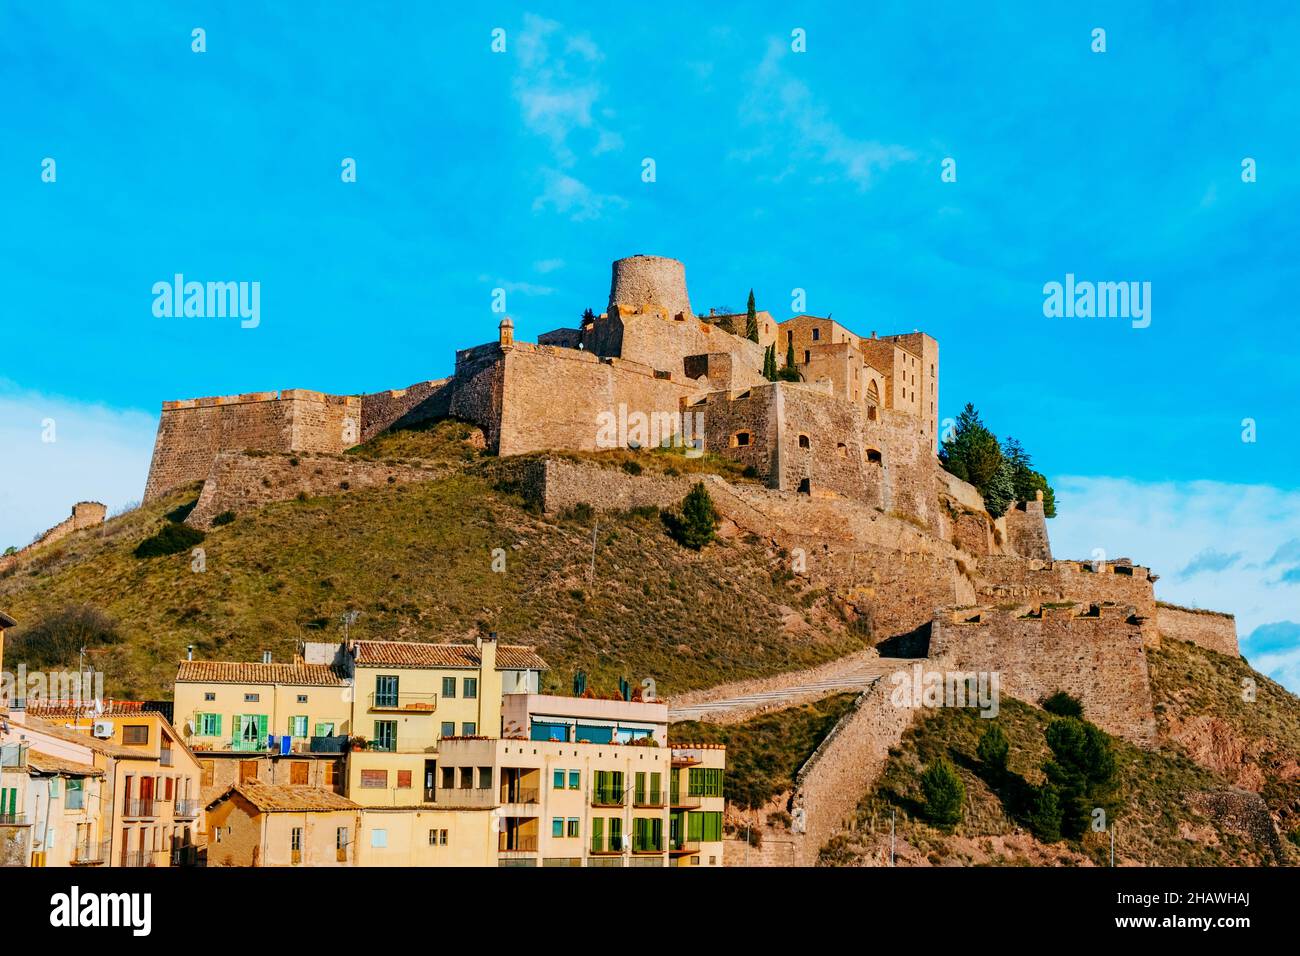 a panoramic view of the old town of Cardona, in Catalonia, Spain, highlighting the medieval Castle of Cardona at the top of the hill Stock Photo